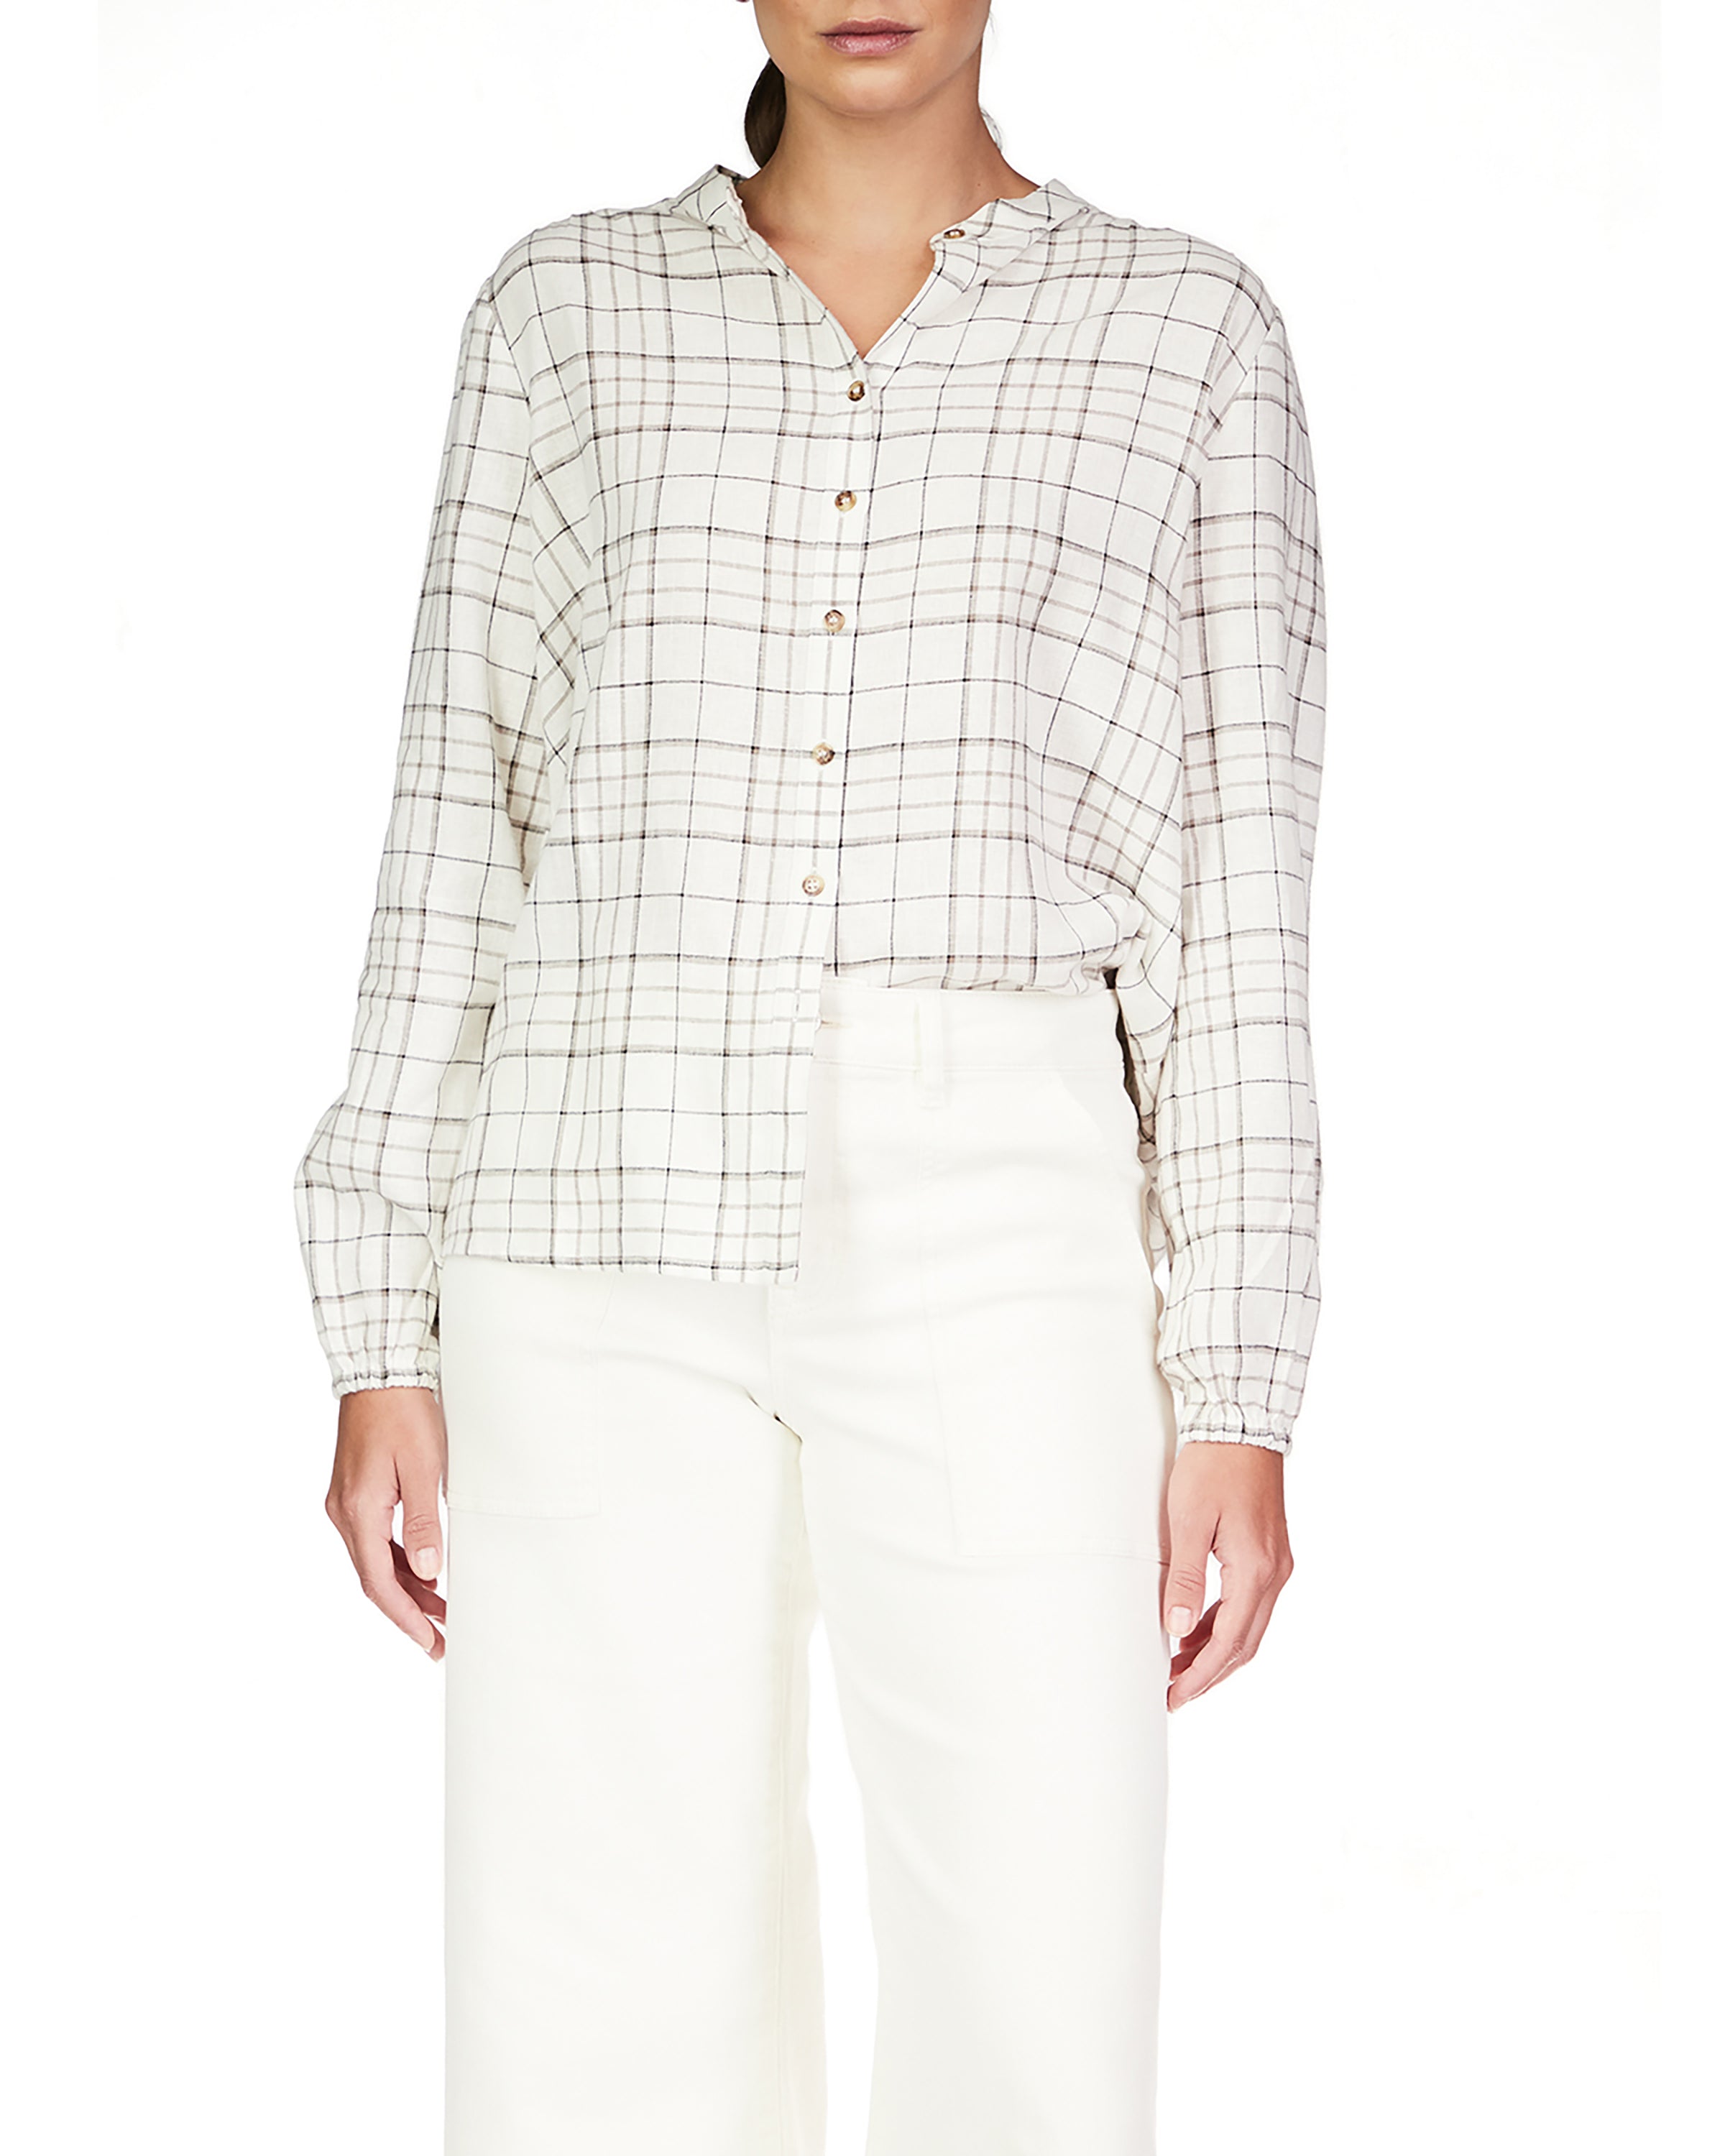 Sanctuary As You Are Button Front Shirt in Graphic Windowpane